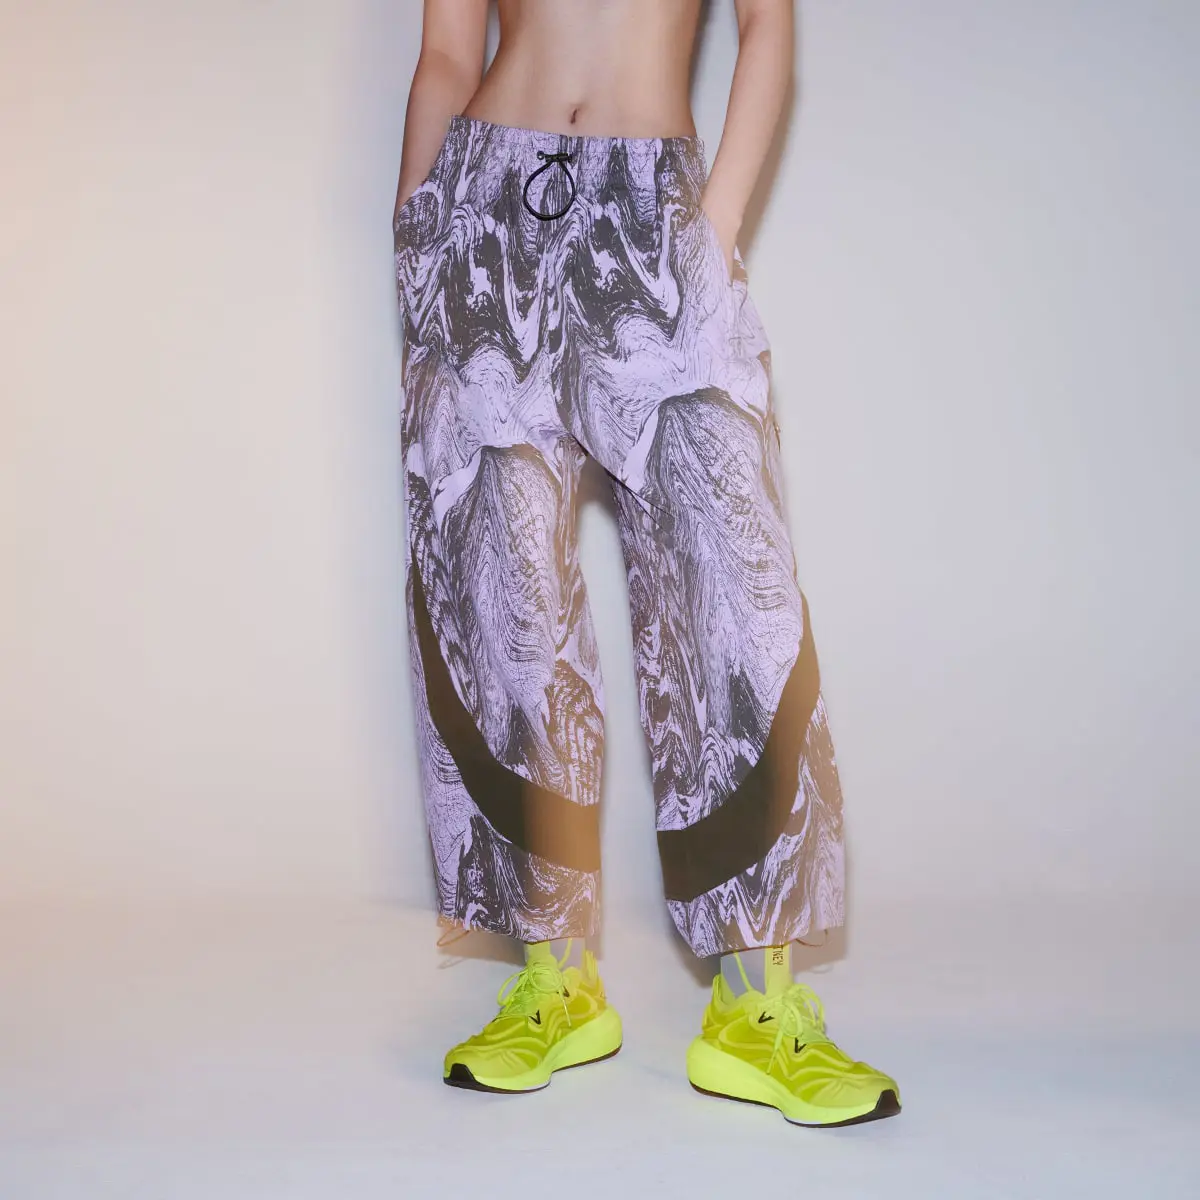 Adidas by Stella McCartney TrueCasuals Woven Track Pants. 2